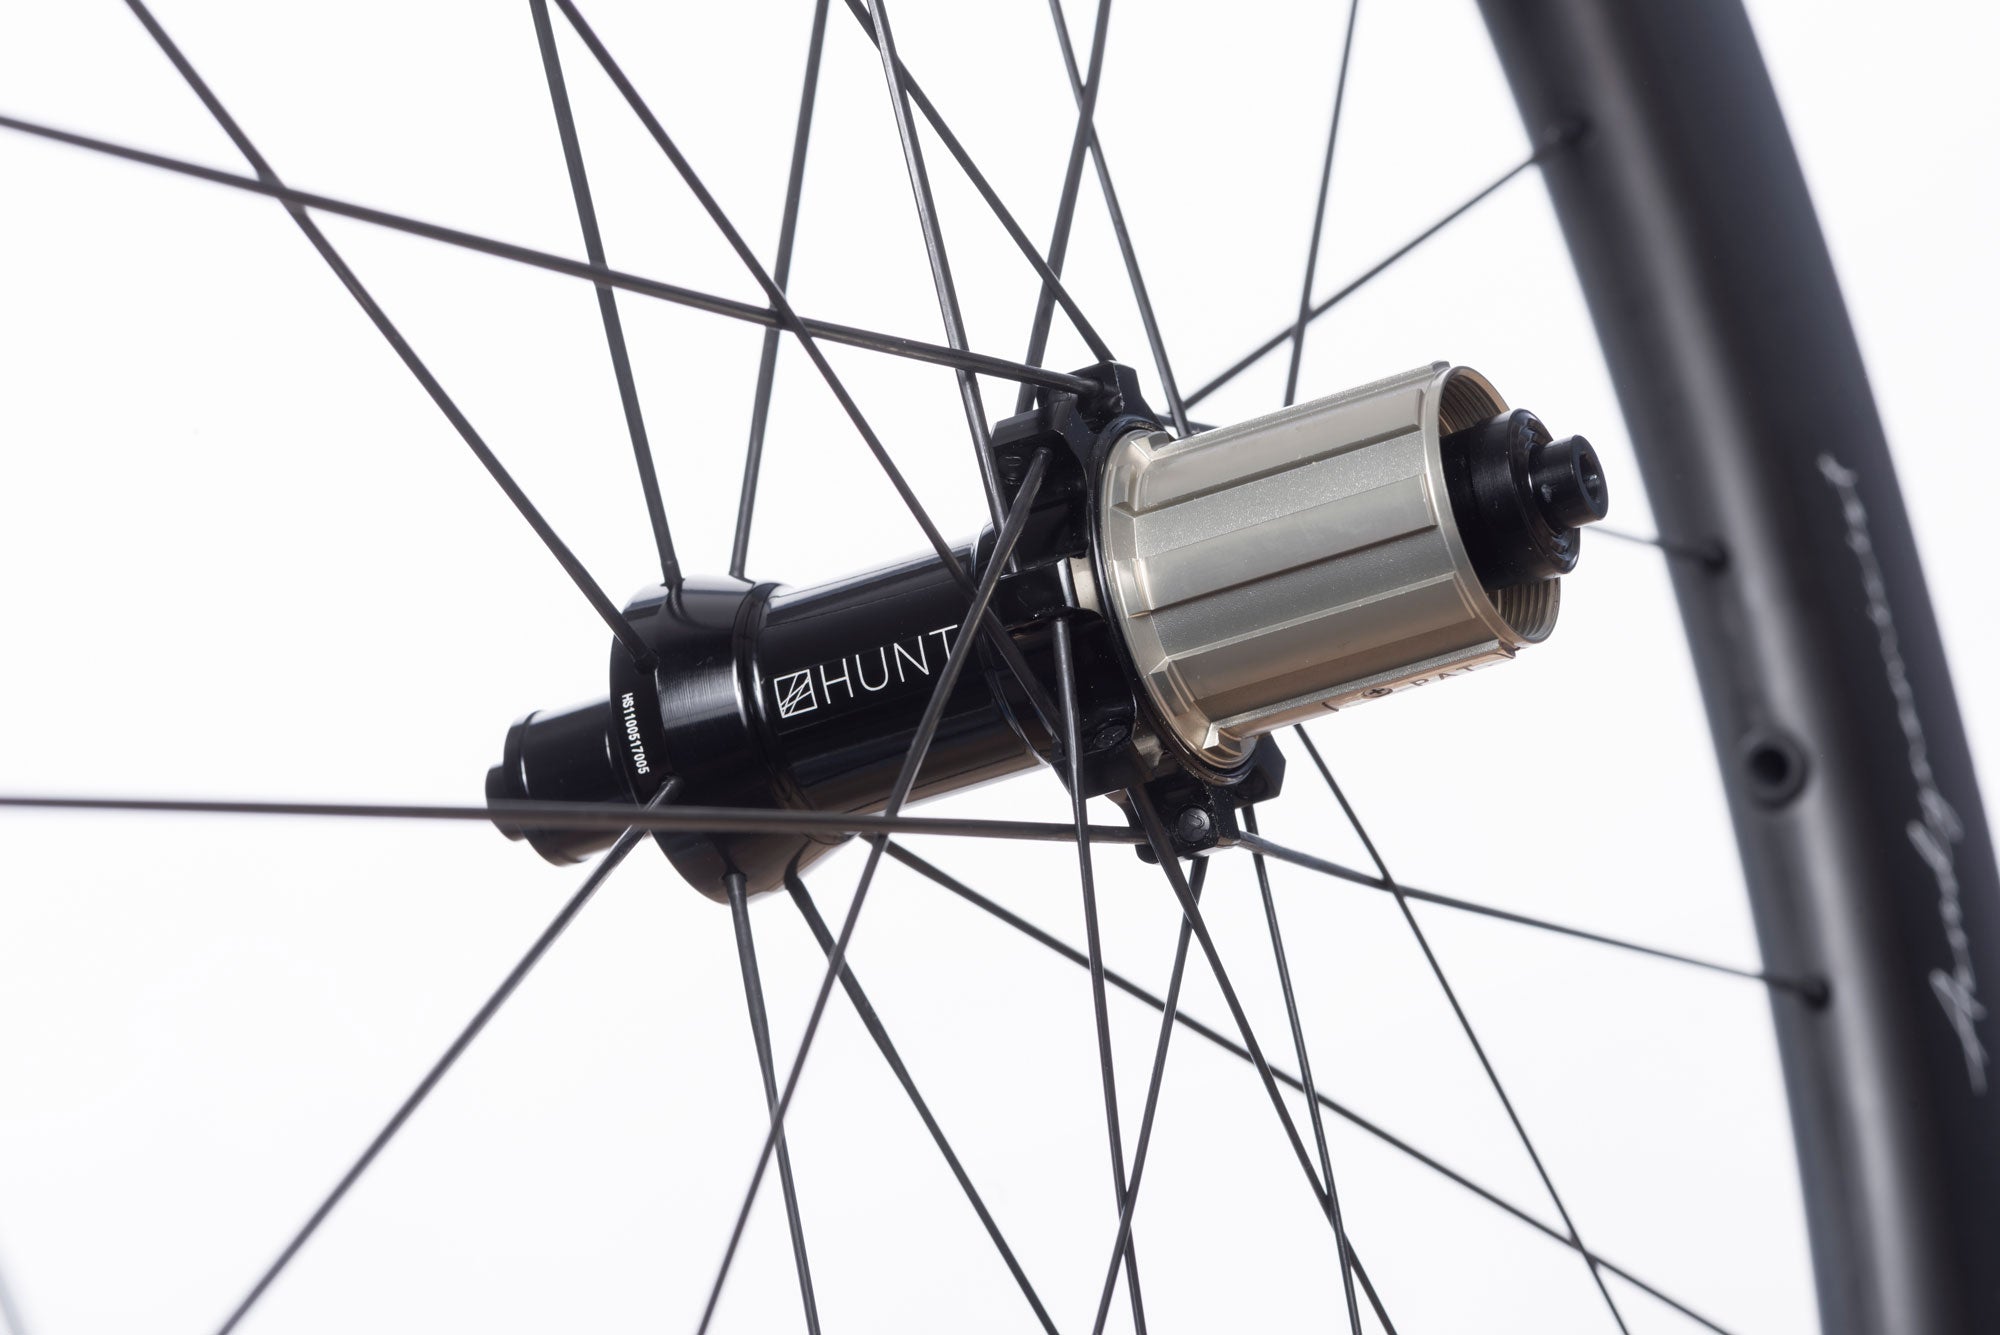 <h1>FREEHUB BODY</h1><i>Featuring 3 multi-point pawls with 3 teeth each and a 48t ratchet ring. The result an impressively low 7.5˚ engagement angle. Durability is a theme for HUNT, and so all our freehub bodies have Steel Spline Insert re-enforcements to provide excellent durability against cassette sprocket damage often seen on standard alloy freehub bodies. Includes 2 CeramicSpeed bearings in the body.</i>